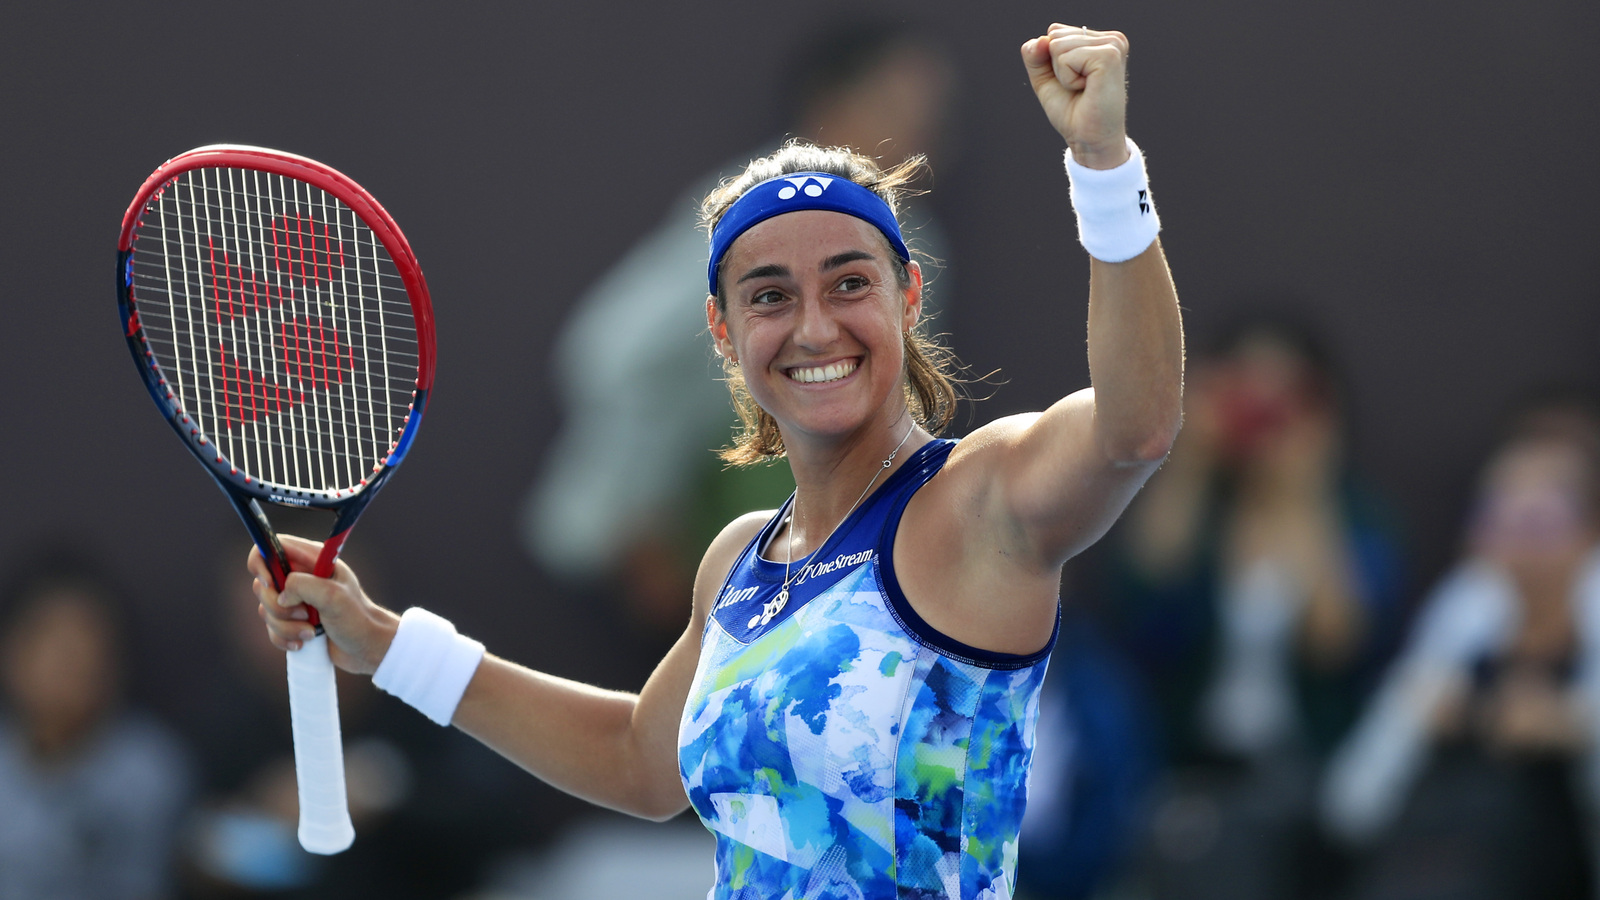 Caroline Garcia goes complete fangirl over Roger Federer, expresses her dream to ‘get a coffee with him’